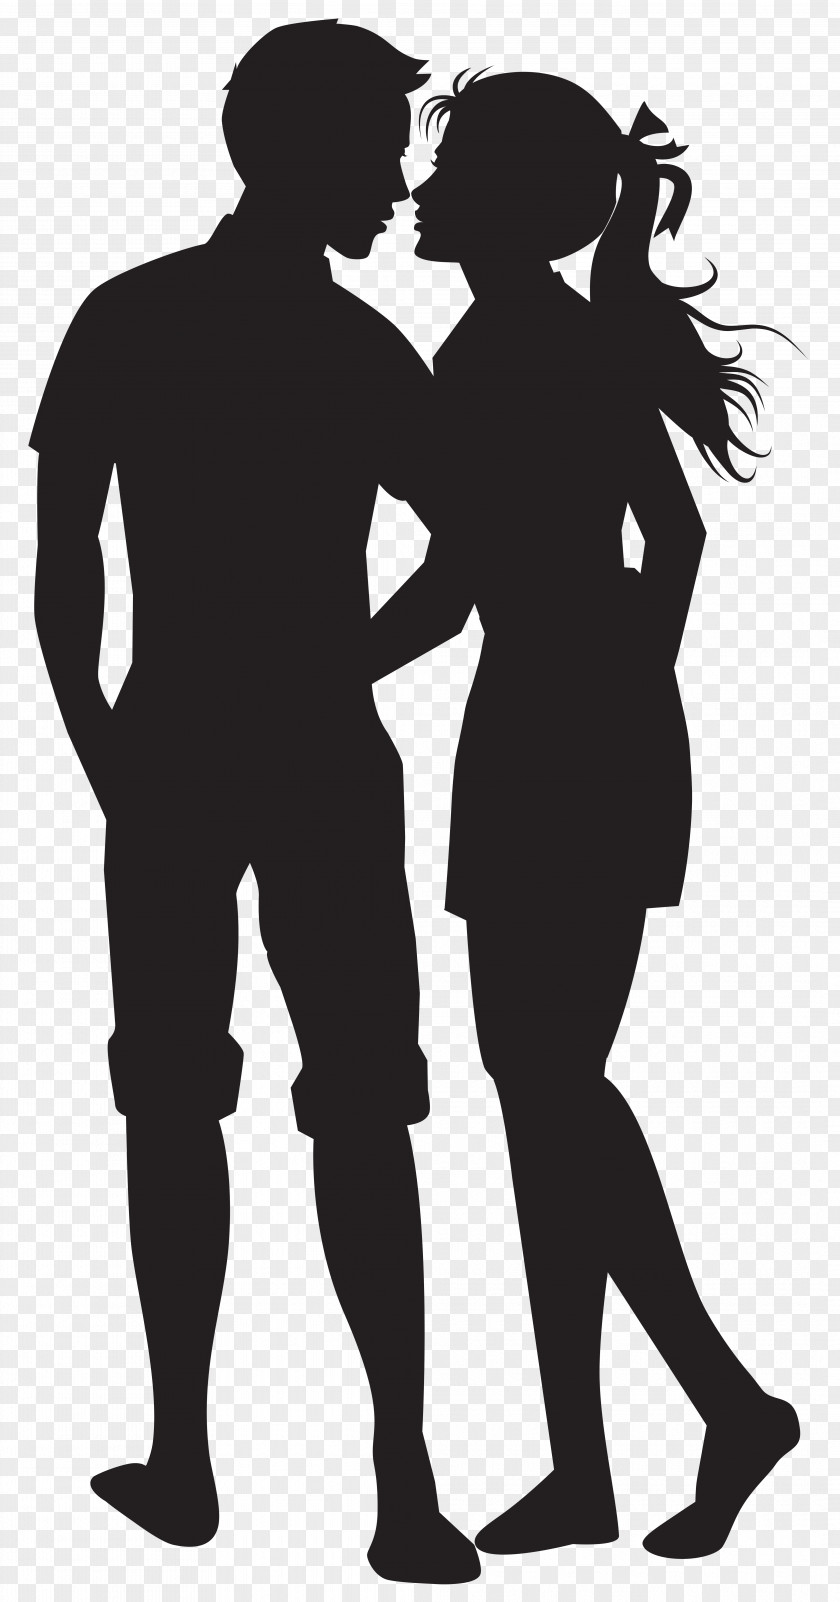 Couple Silhouettes Clip Art Image PNG